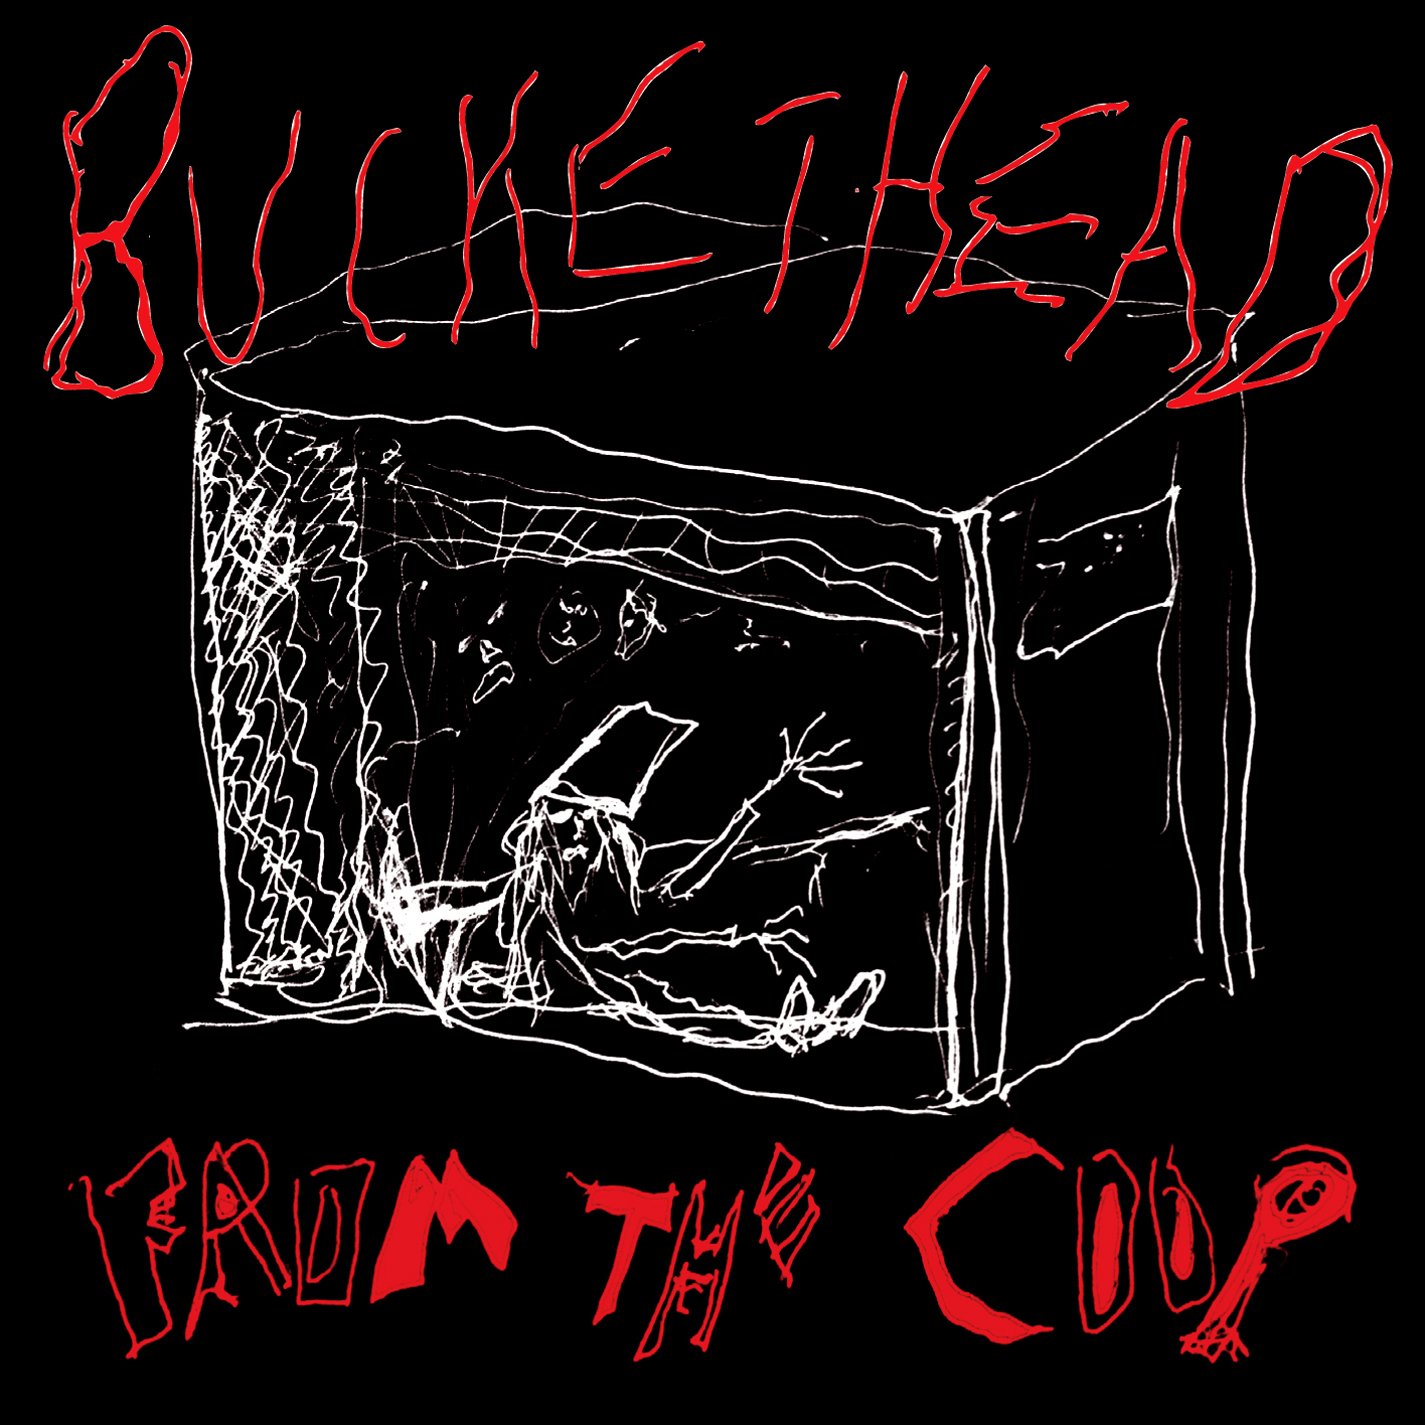 Buckethead-From the Coop-CD-FLAC-2008-GRAVEWISH